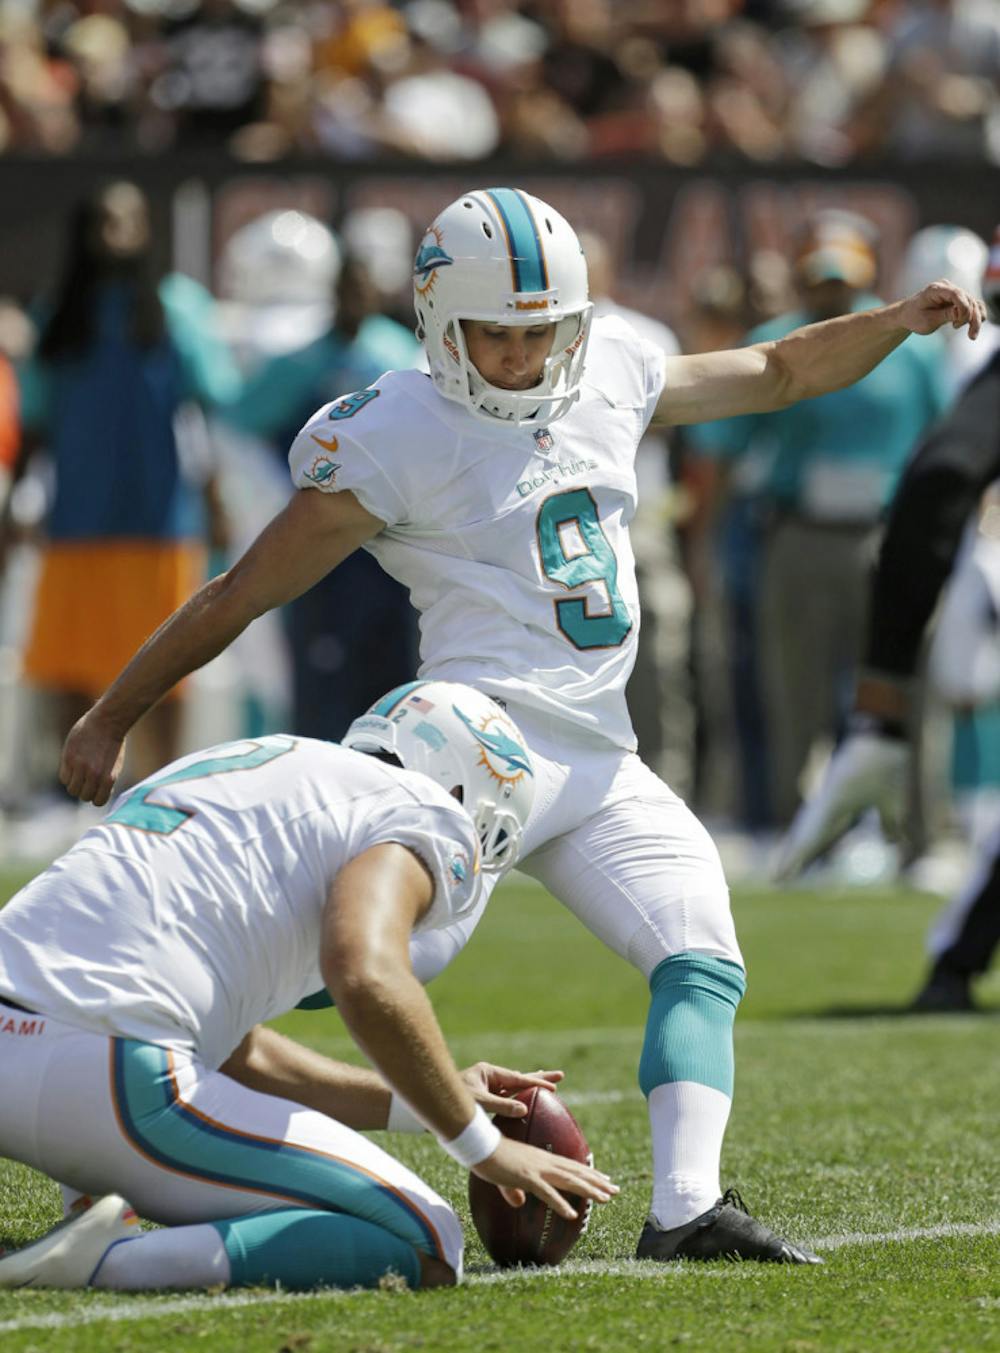 <p>Caleb Sturgis kicks a 45-yard field goal against the Cleveland Browns in the first quarter of Miami’s 23-10 victory on Sunday.</p>